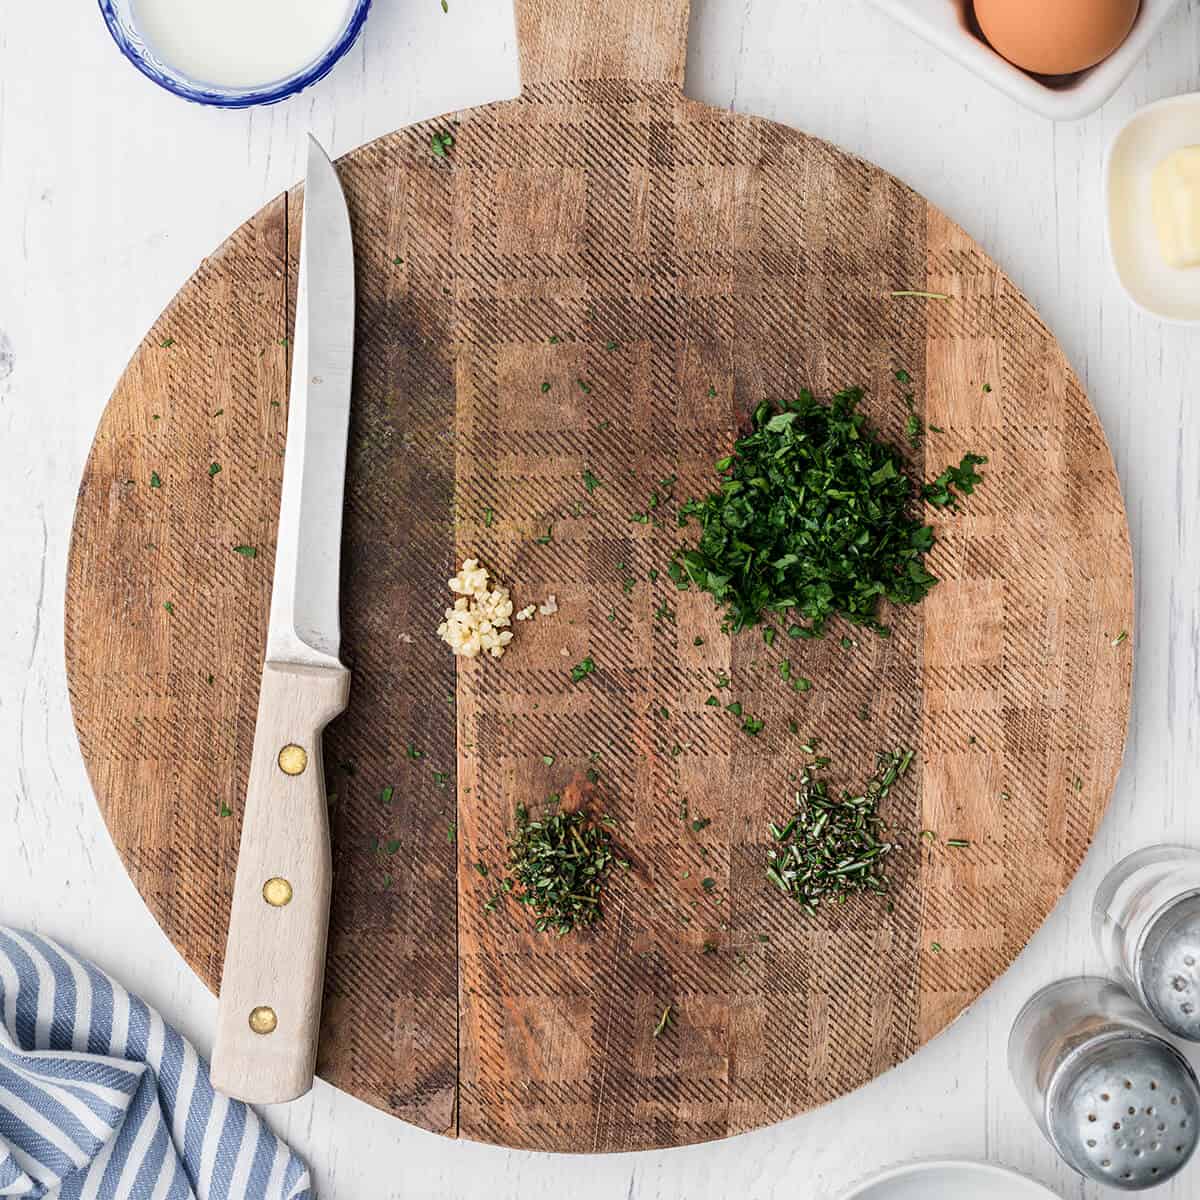 Minced garlic and herbs on a wooden board.